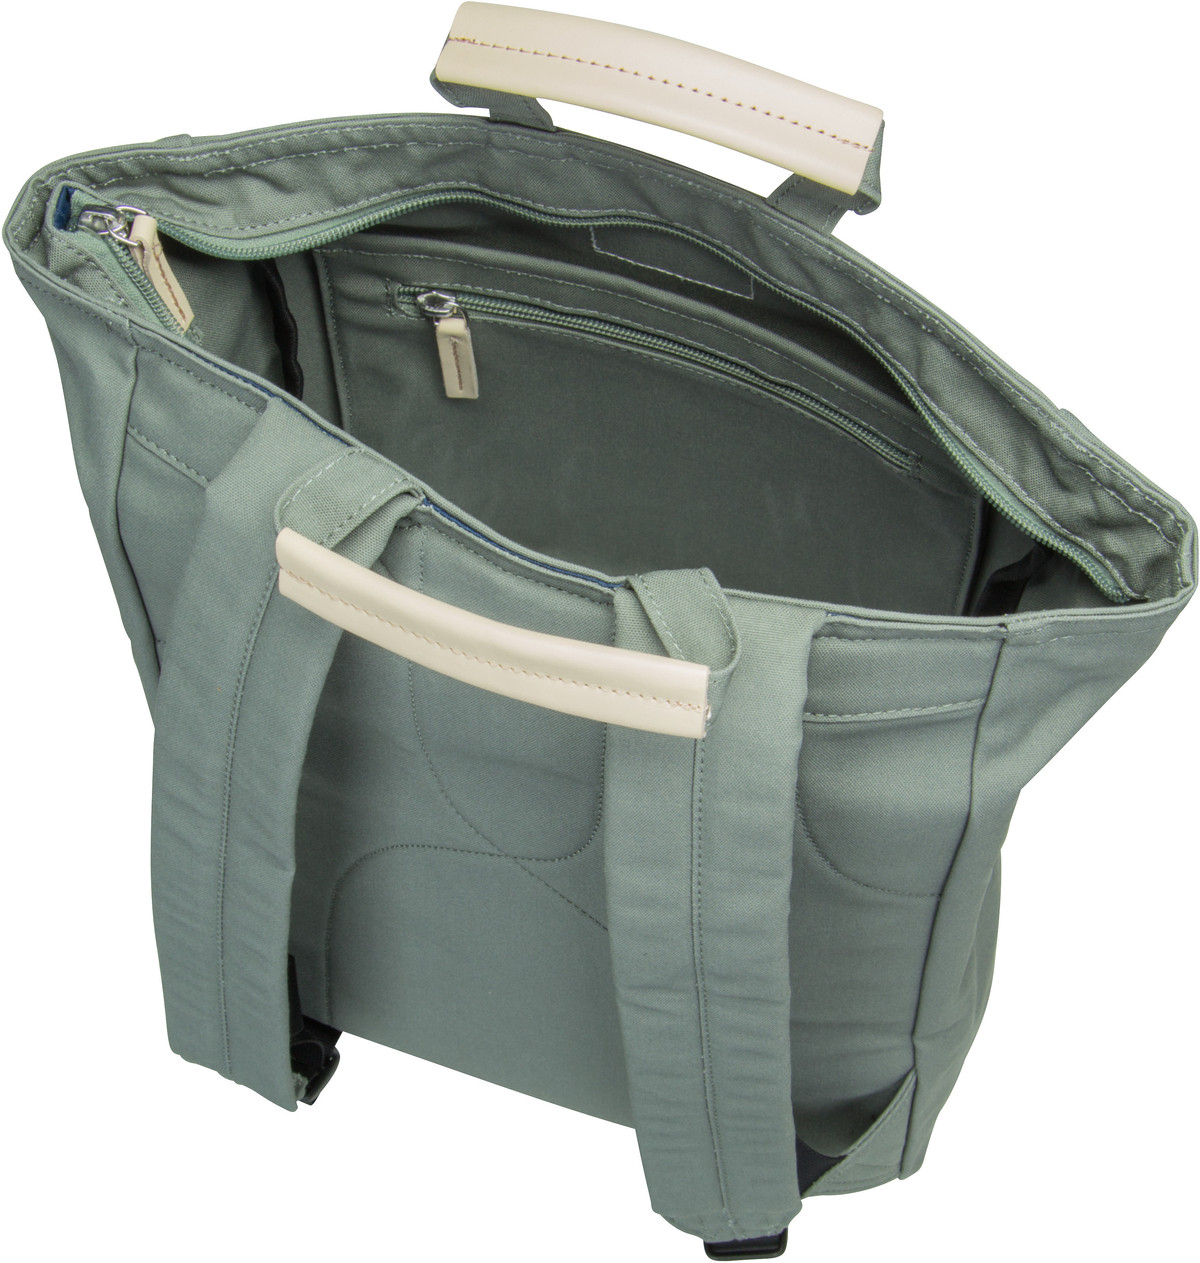 Sandqvist Tony Totepack - Dusty Green/Natural Leather